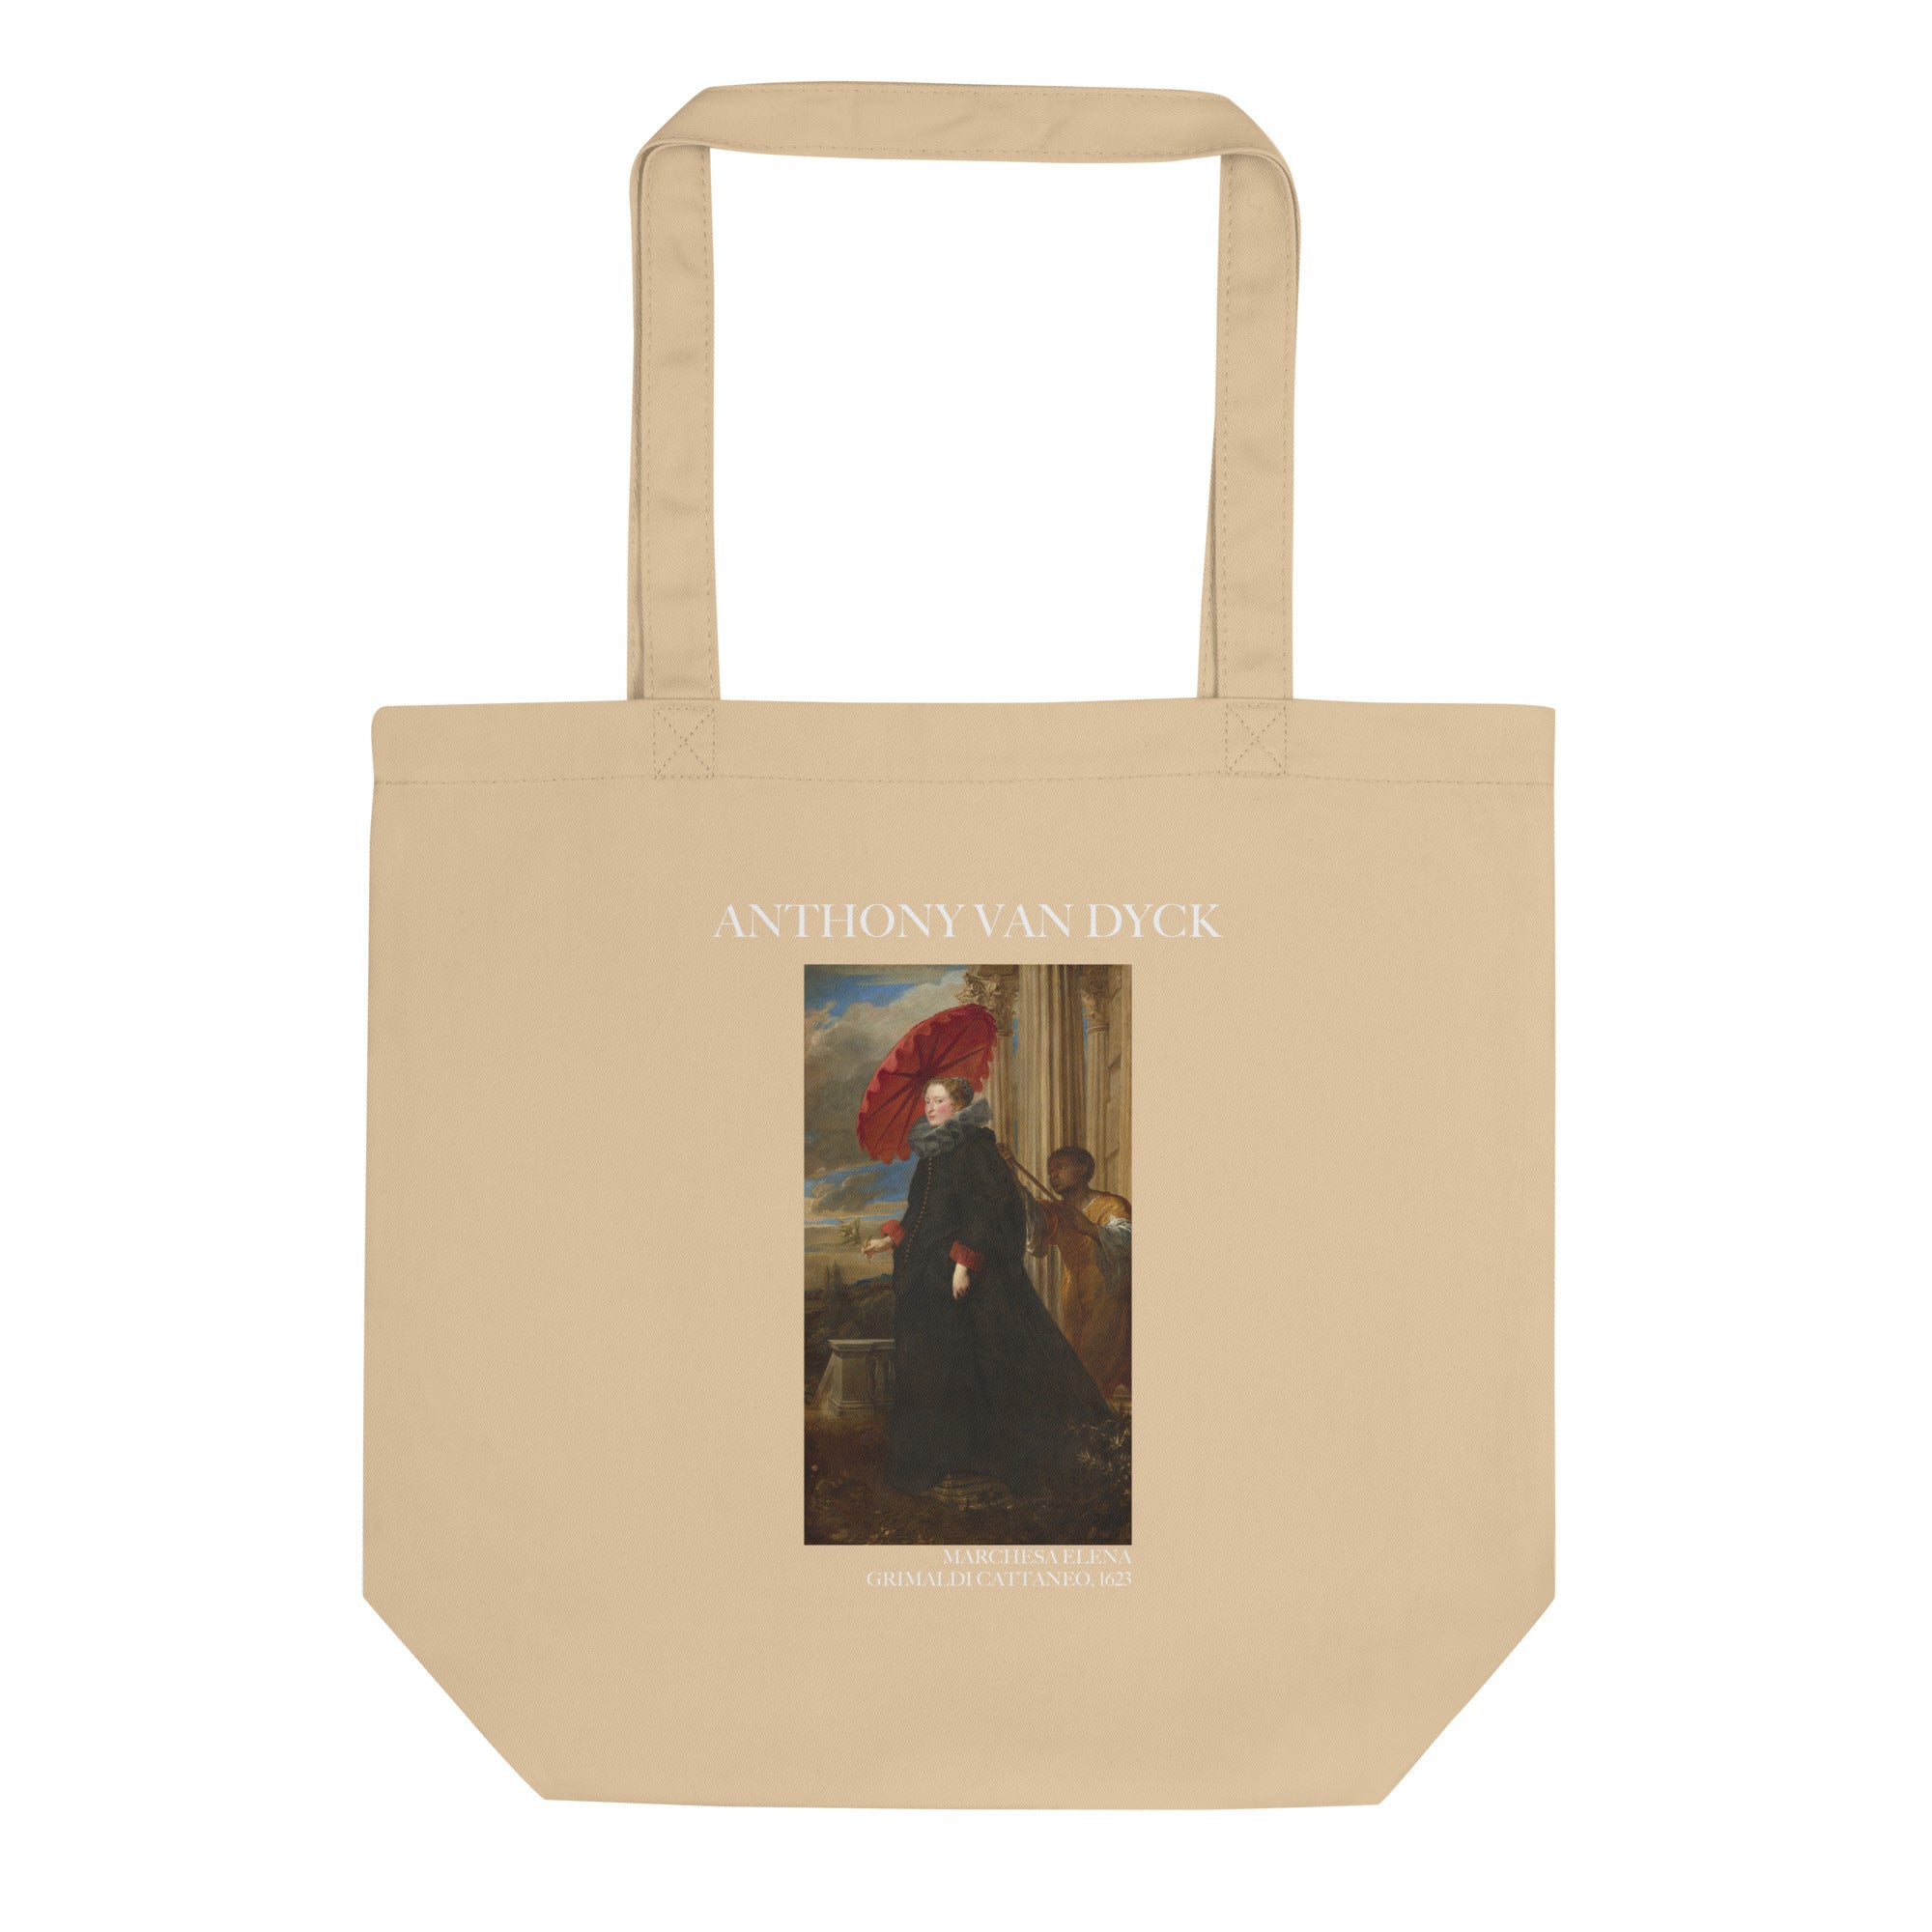 Sir Anthony van Dyck 'Marchesa Elena Grimaldi Cattaneo' Famous Painting Totebag | Eco Friendly Art Tote Bag